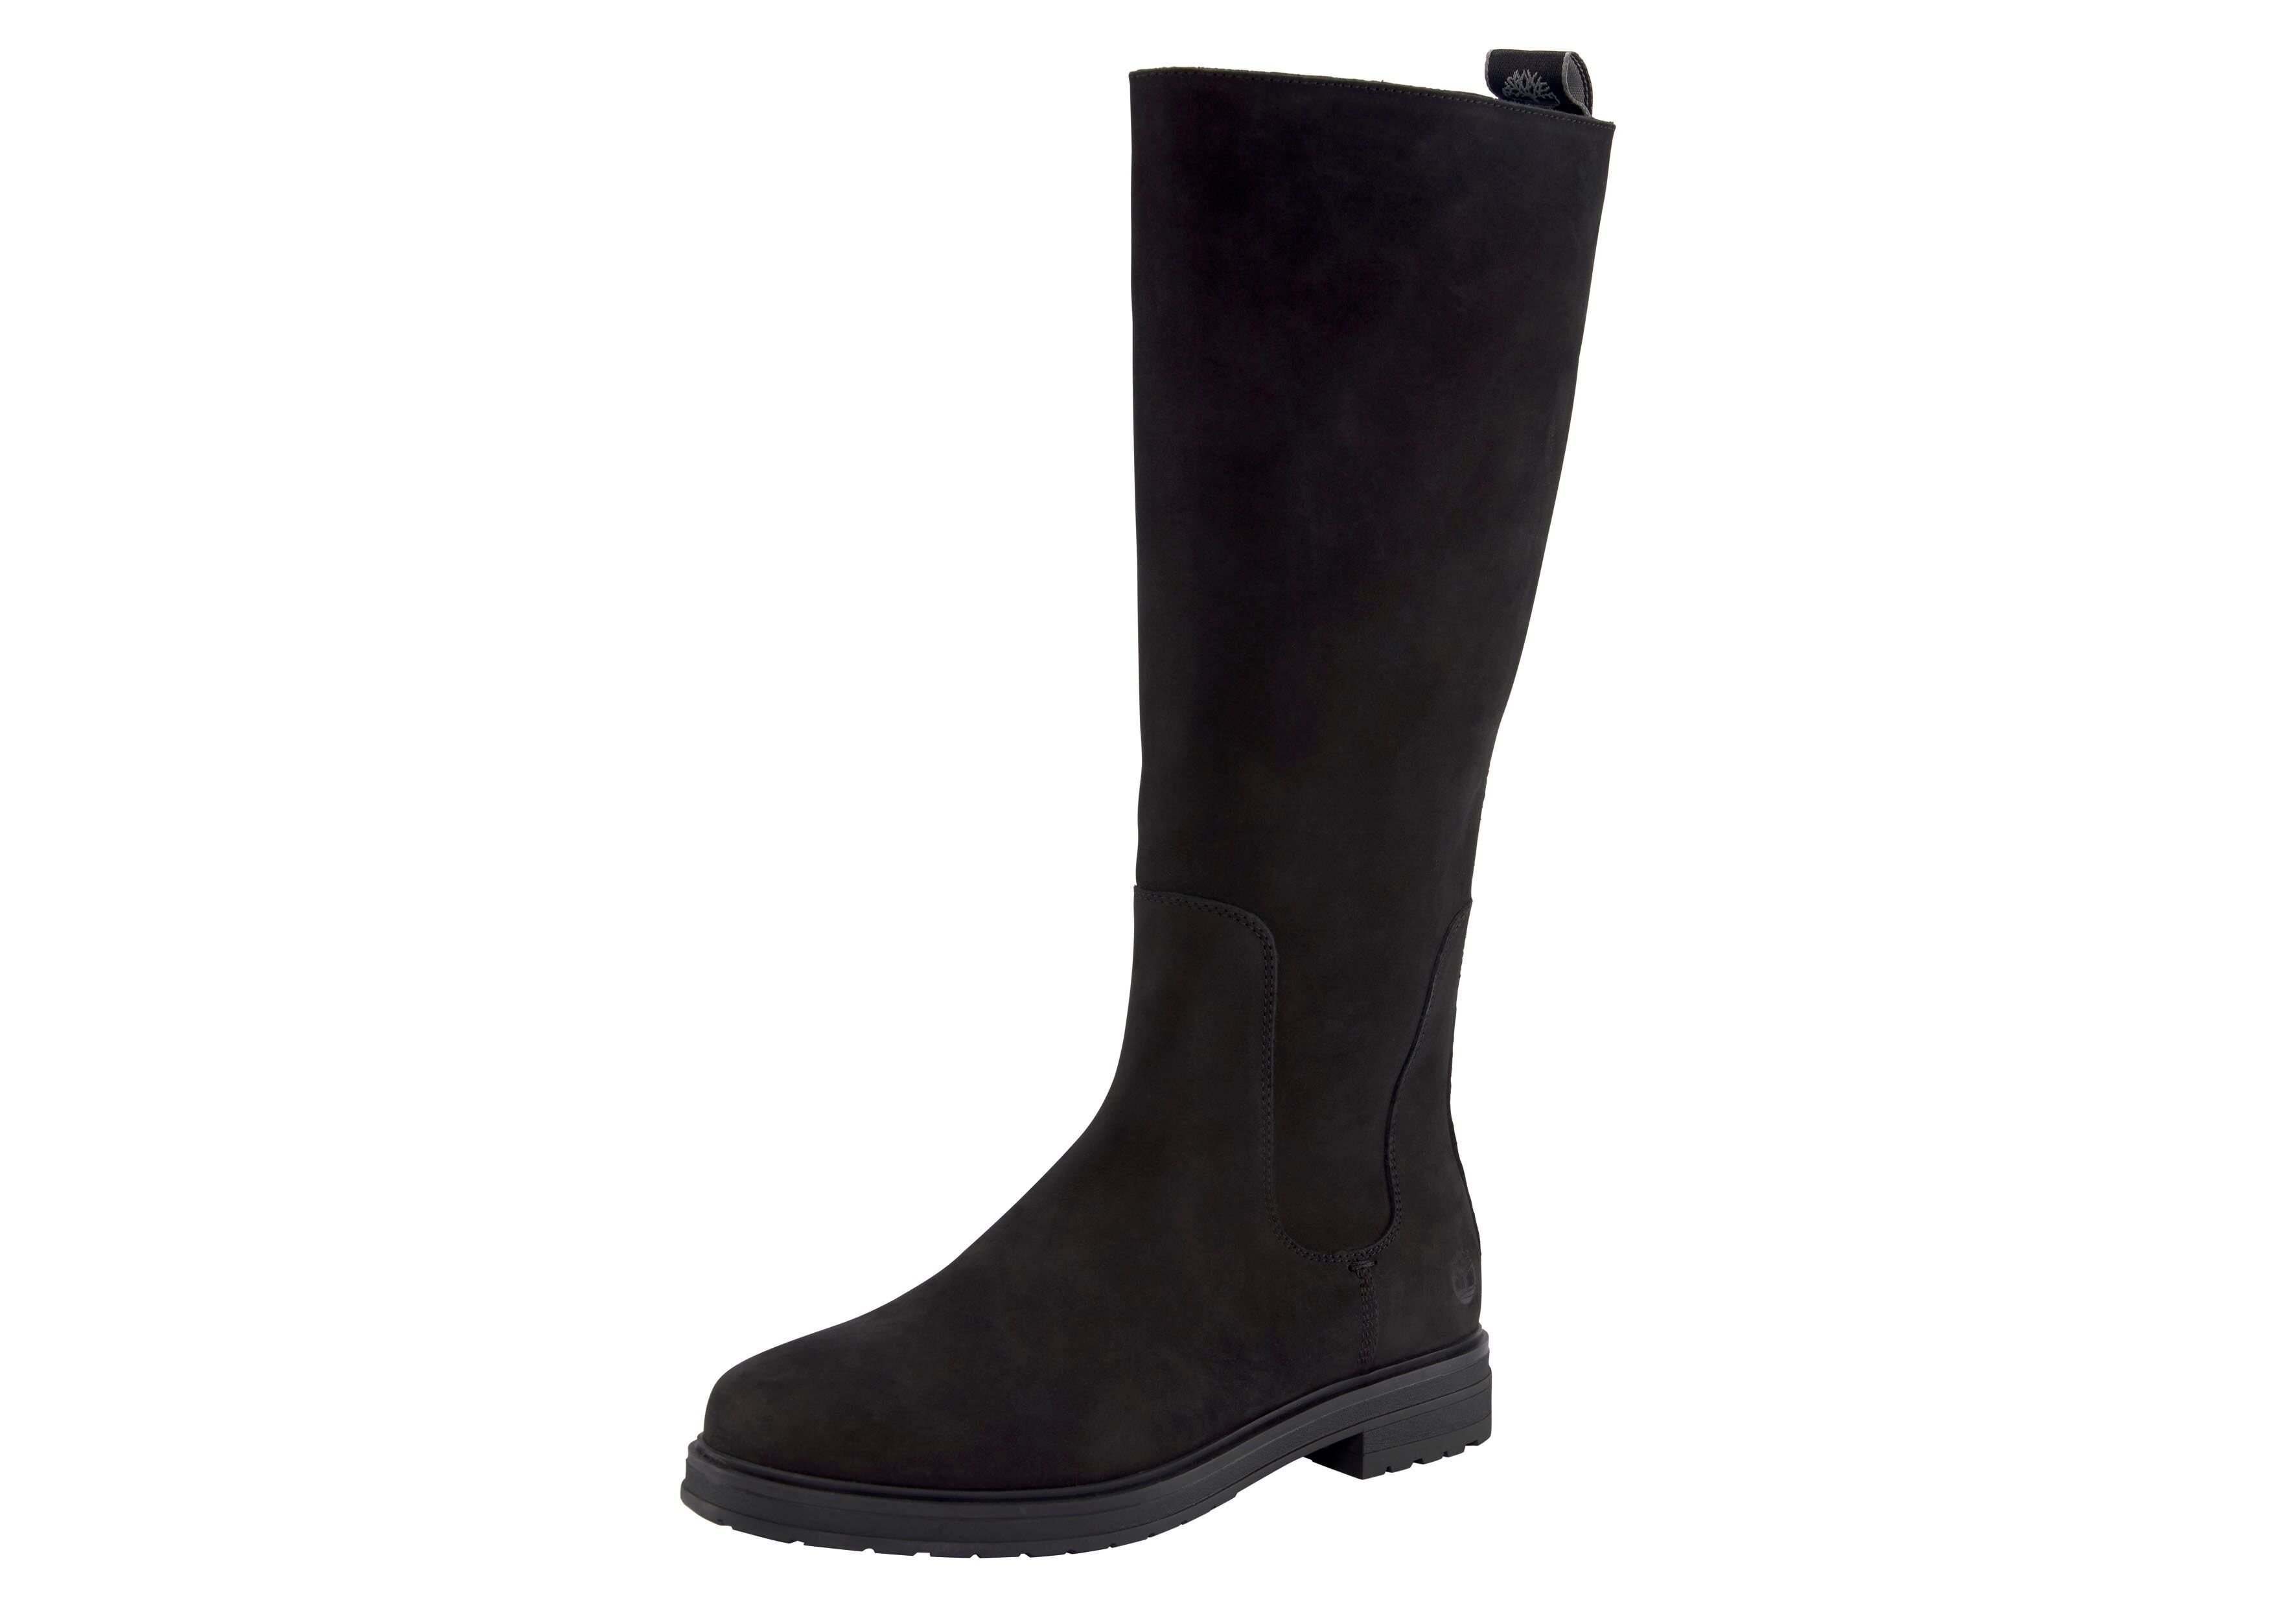 Timberland Stiefel »Hannover Hill Tall Boot« schwarz  36 37,5 37 38 38,5 39 39,5 40 41,5 41 42